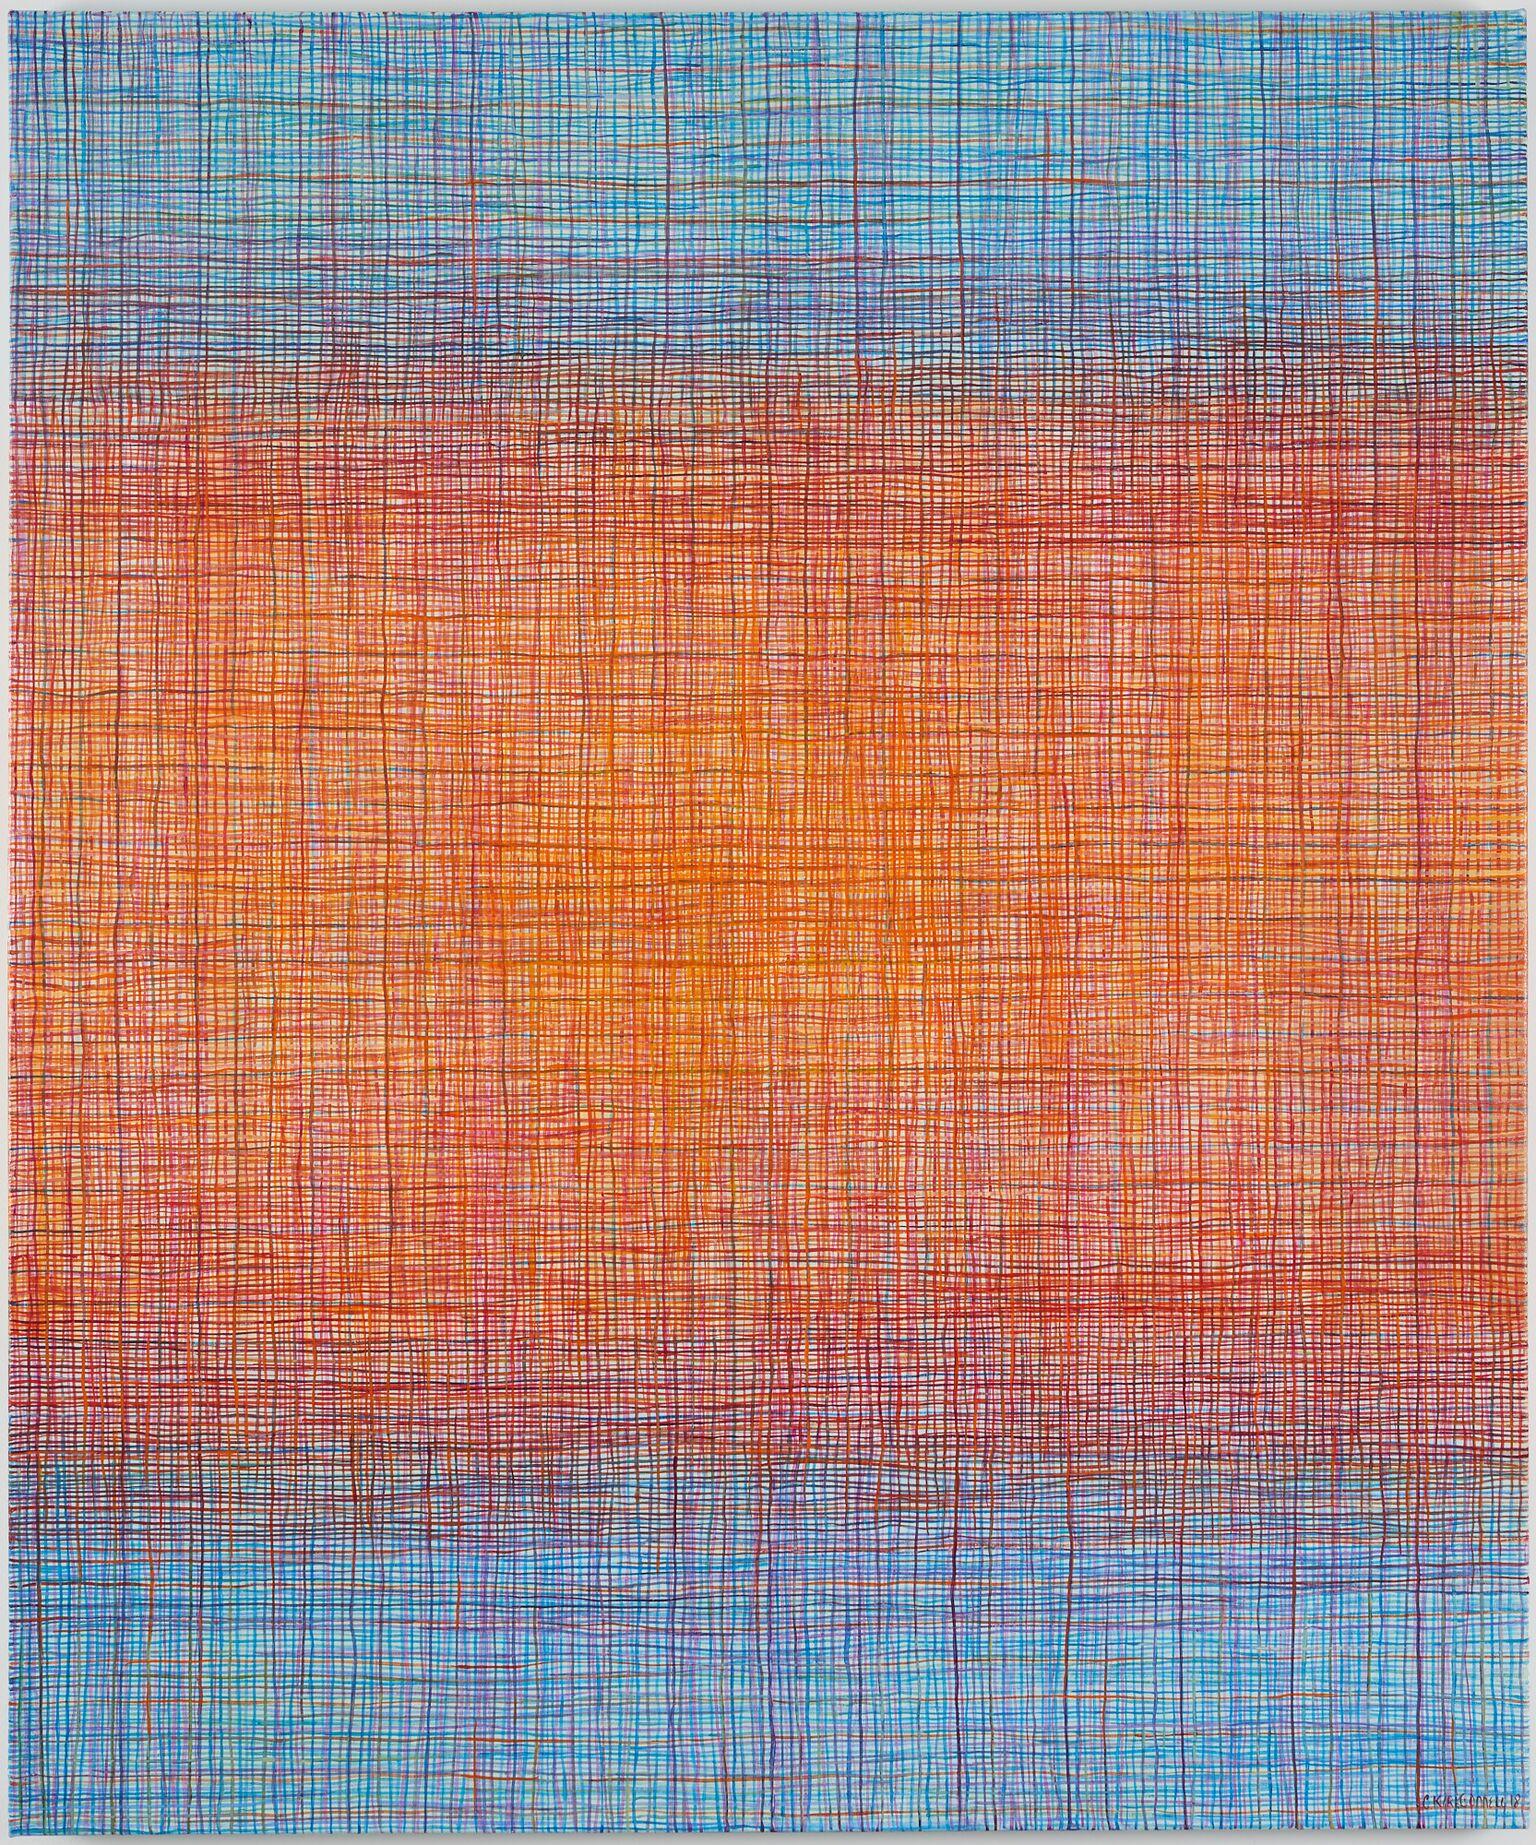 Warp and Weft - Painting by Clare Kirkconnell